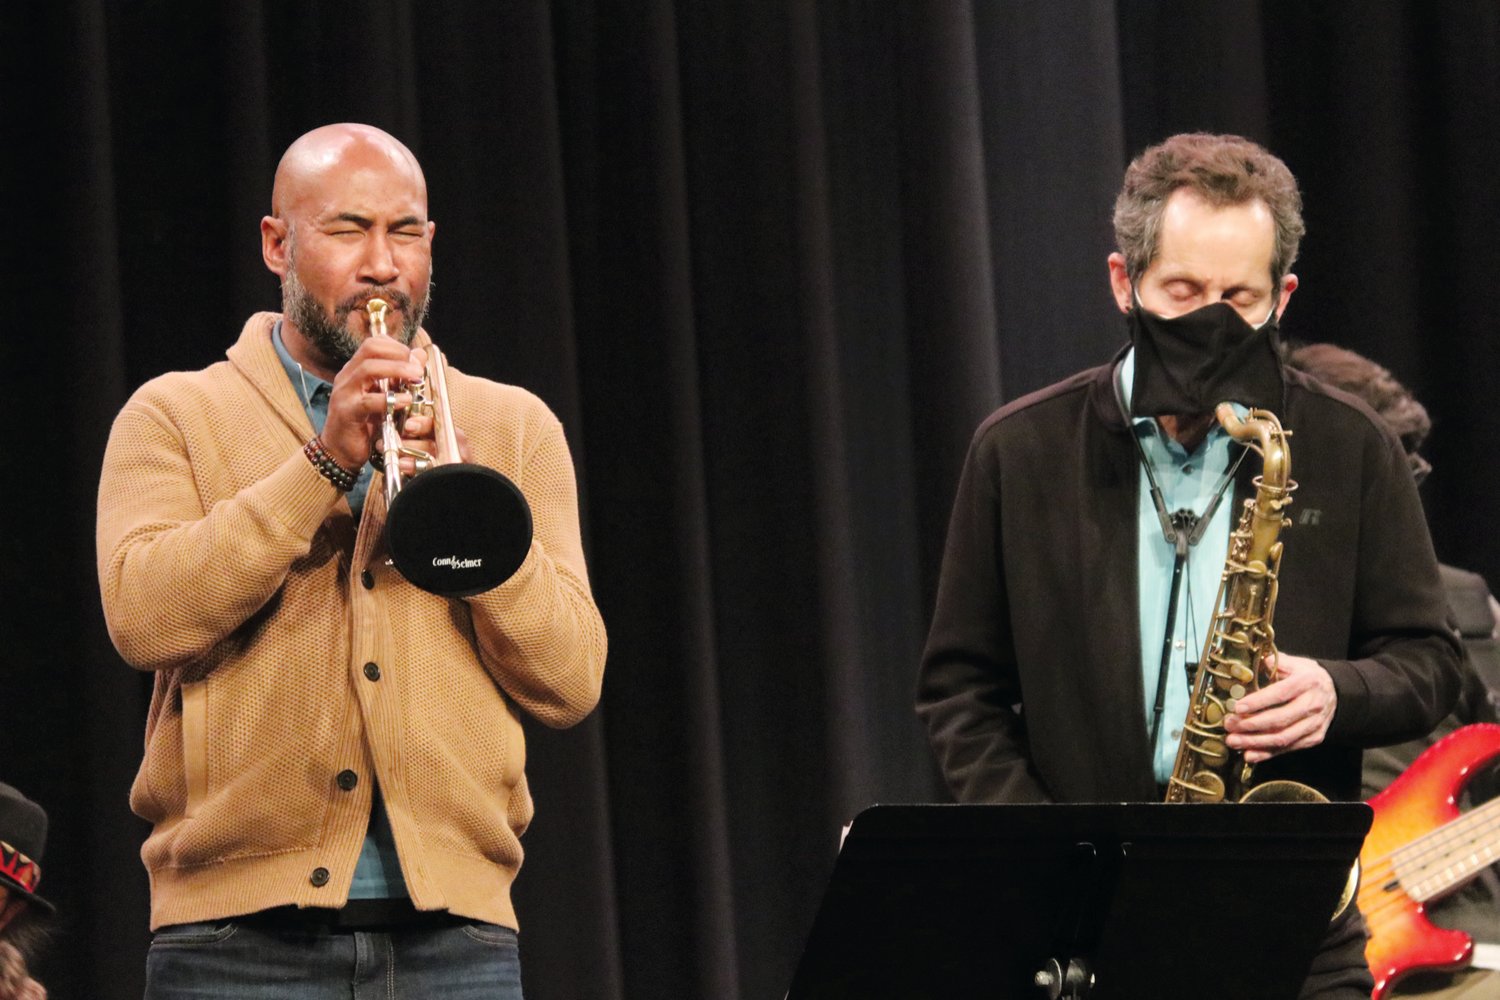 Trumpet player Al Strong (left) and saxophonist Gregg Gelb of La Fiesta Latin Jazz Sextet perform during a Latin jazz workshop they led for student musicians on Jan. 28 in Jordan-Matthews High School. Participating students included the JM Jazz Ensemble and several 8th grade musicians from Chatham Middle and Silk Hope..